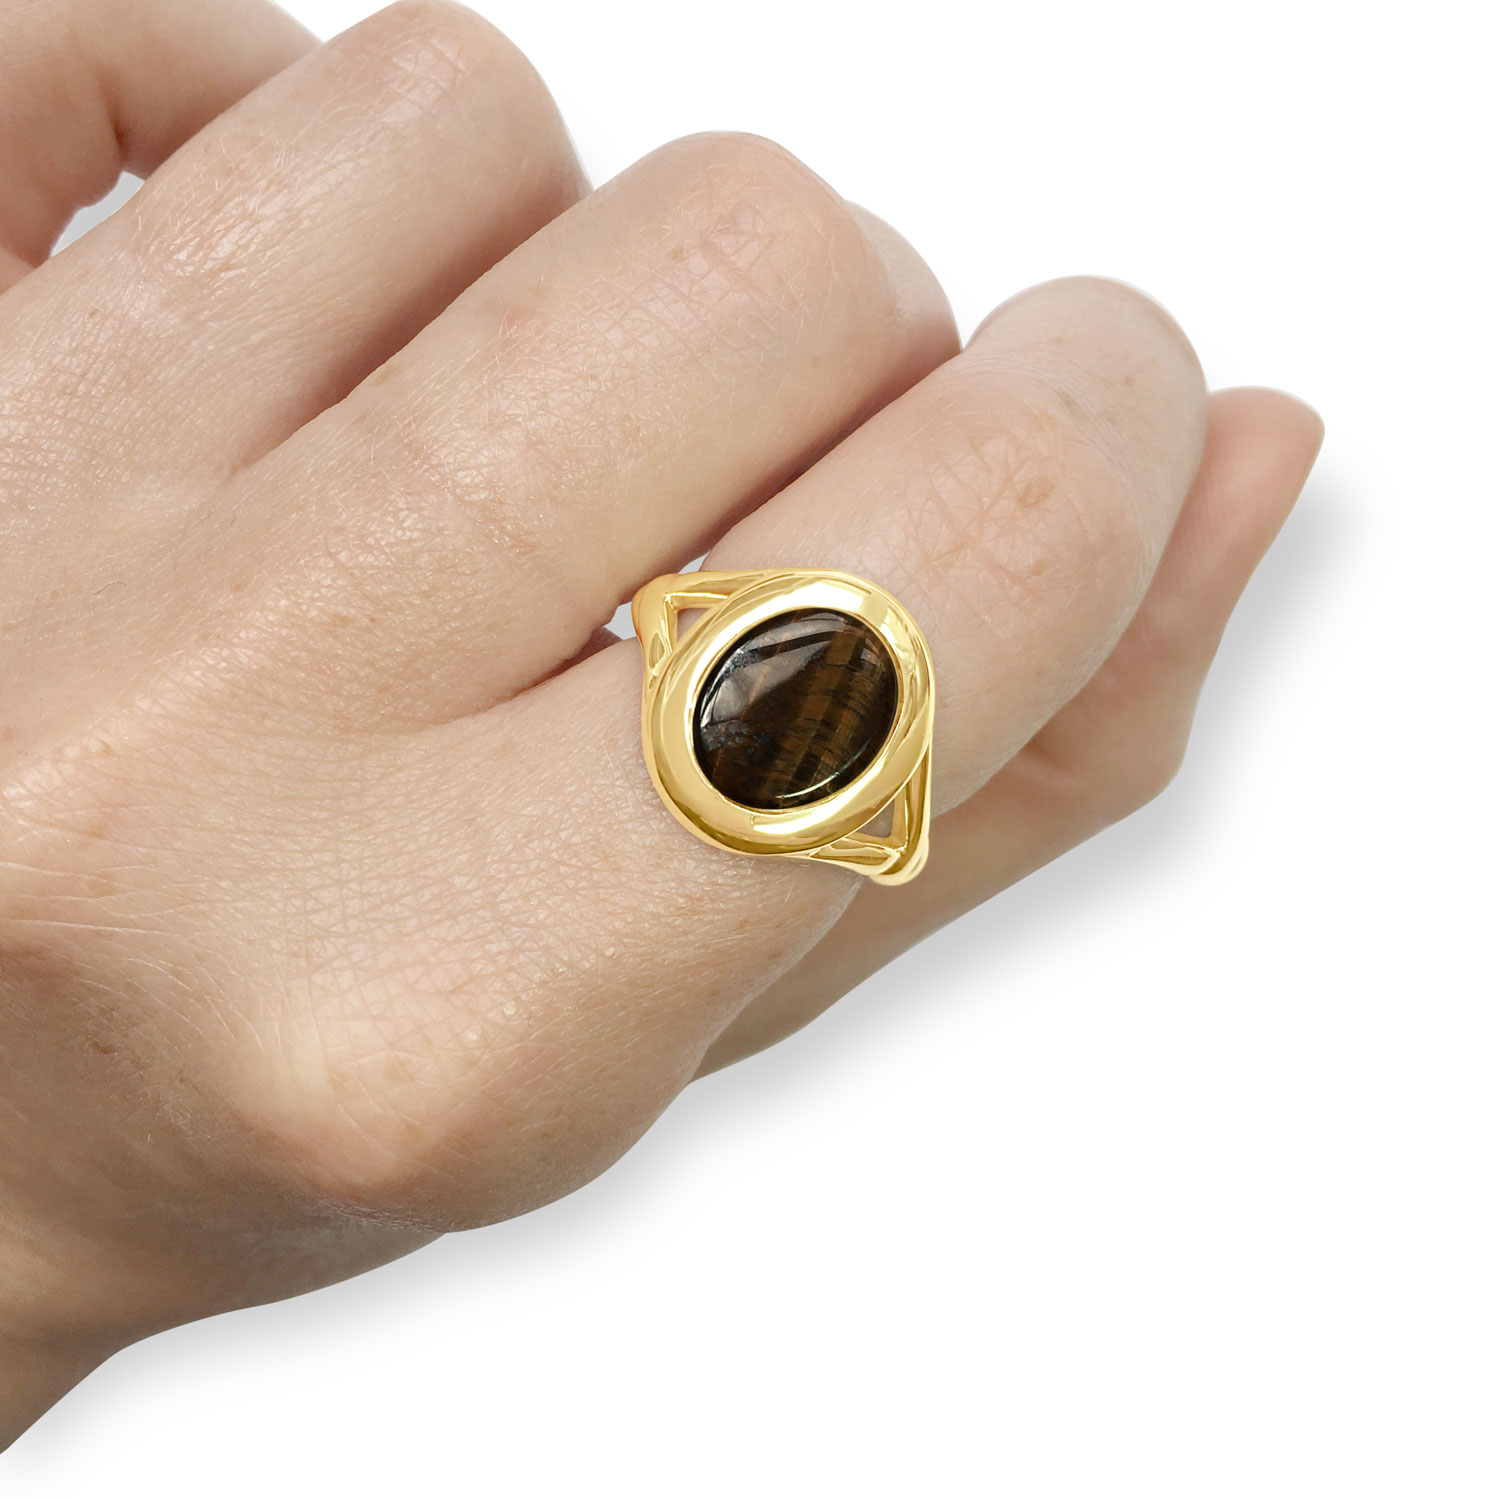 Tiger's eye and yellow gold signet ring hand